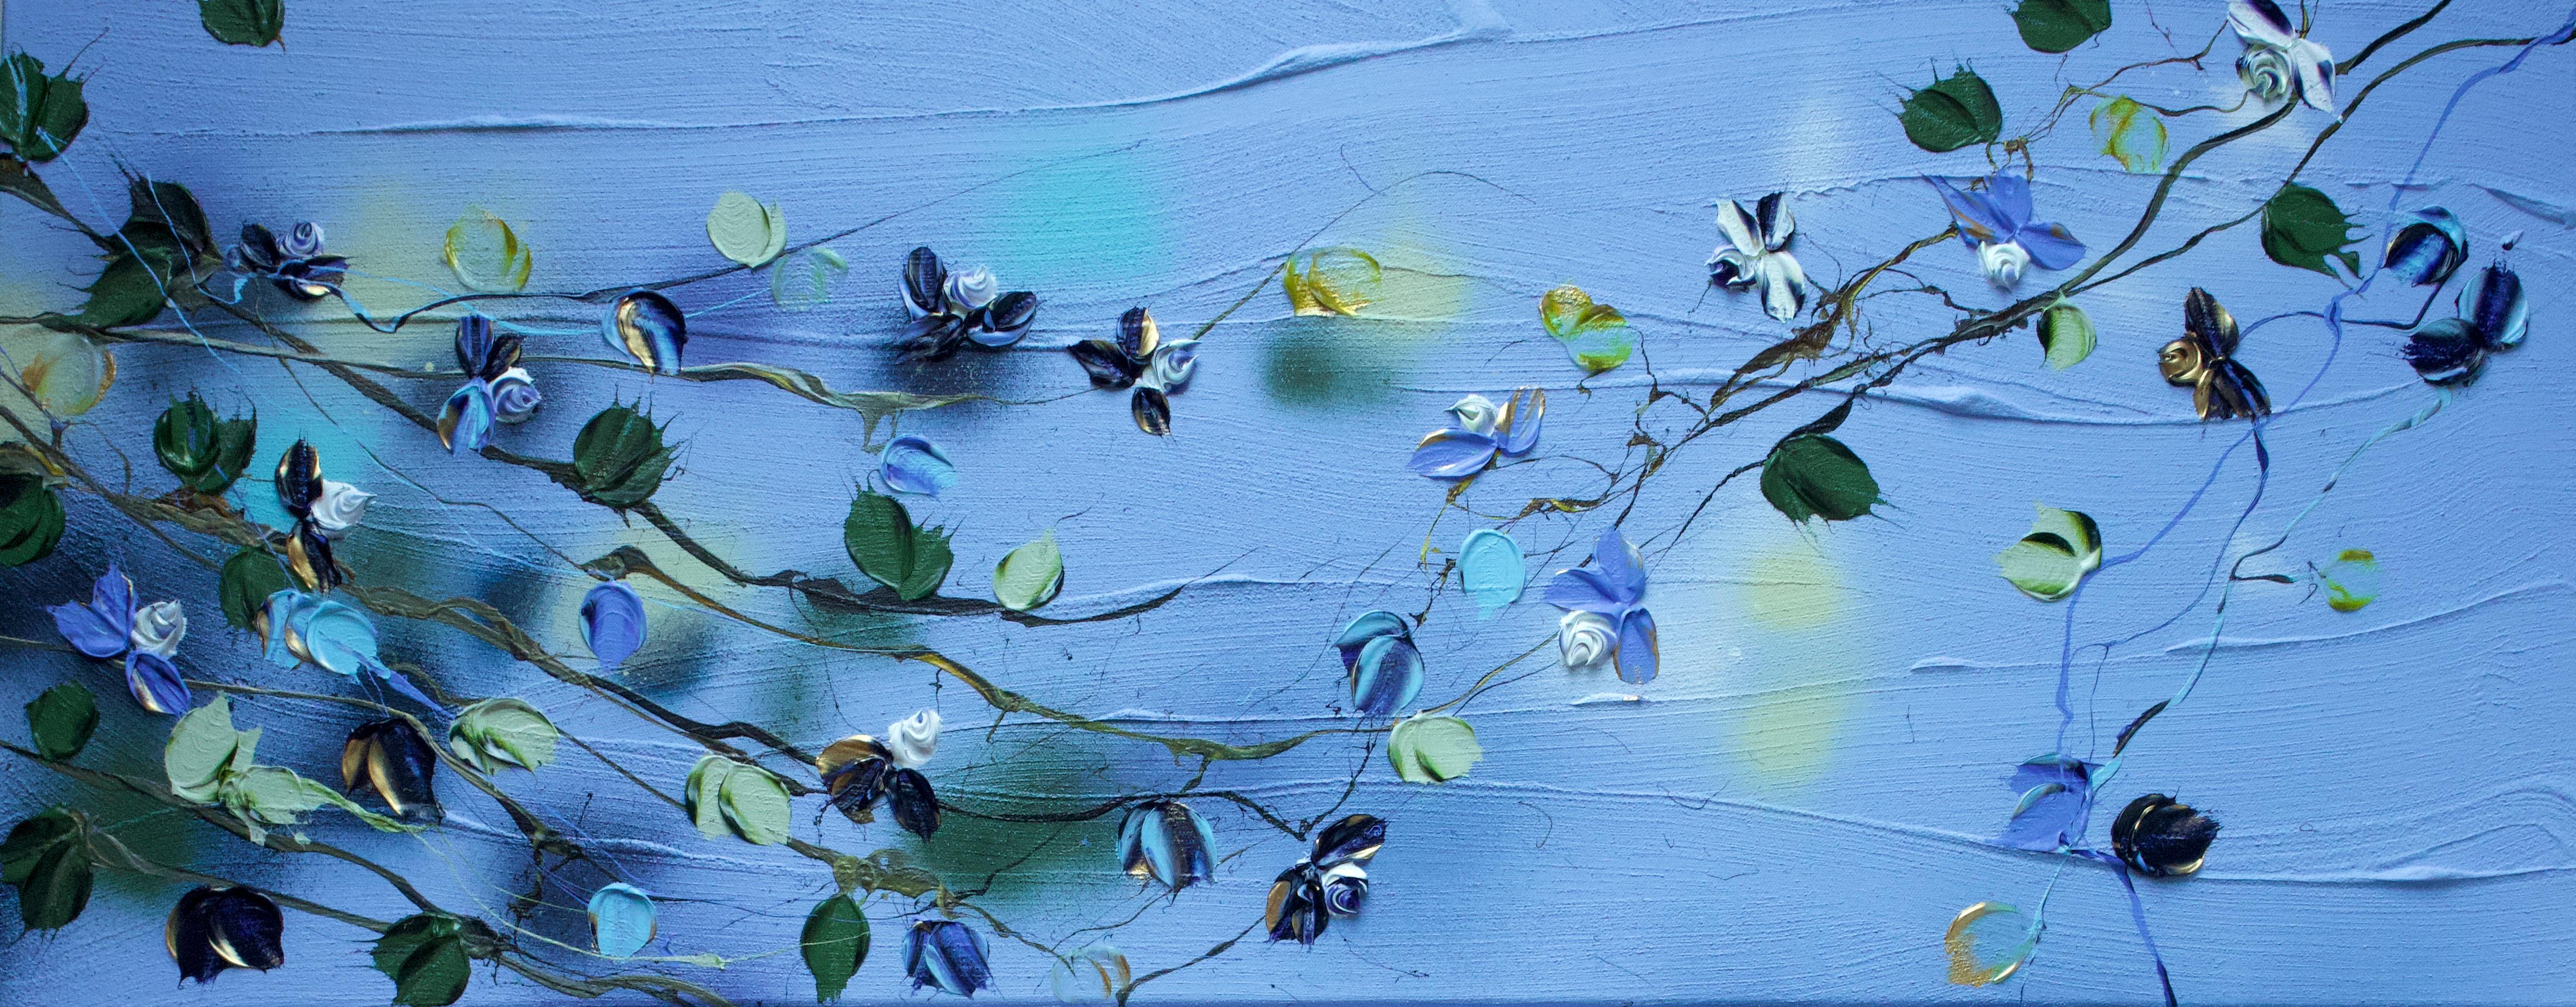 Anastassia Skopp Abstract Painting - "Blue Spring II" floral textured landscape or vertical format